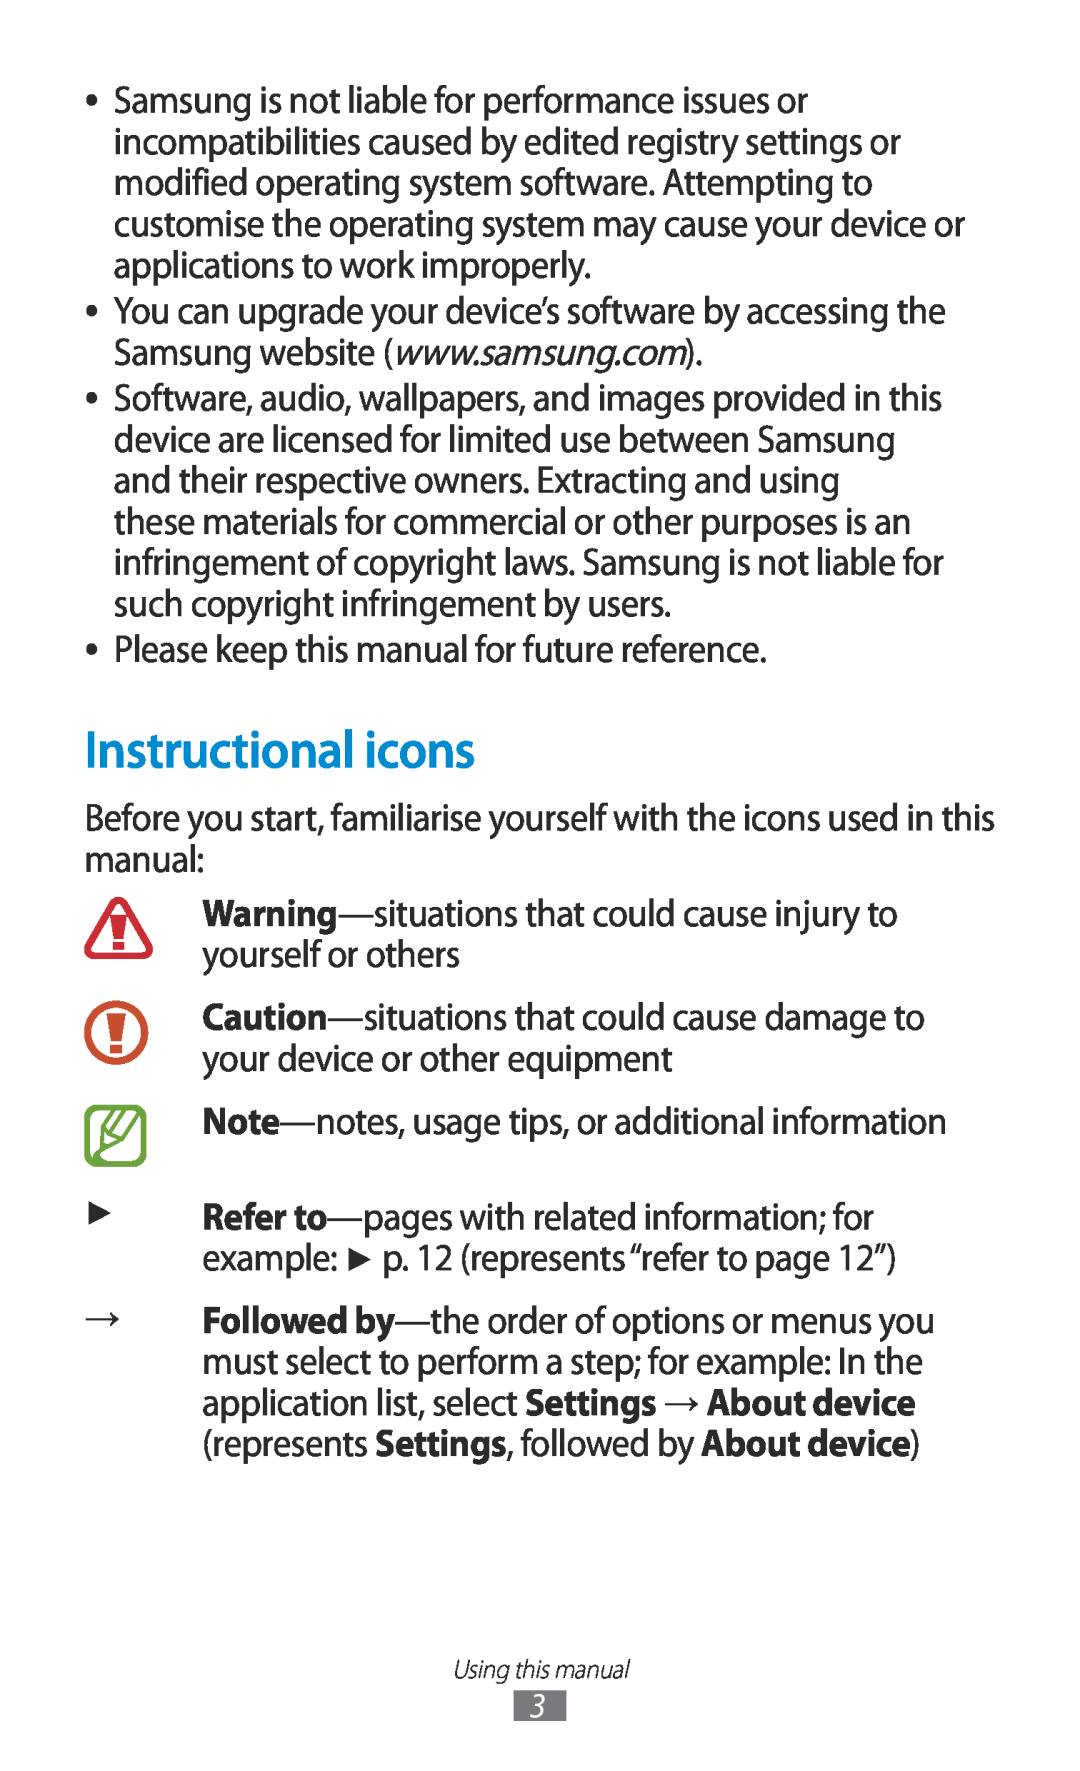 Samsung GTP5110ZWMTTT manual Instructional icons 